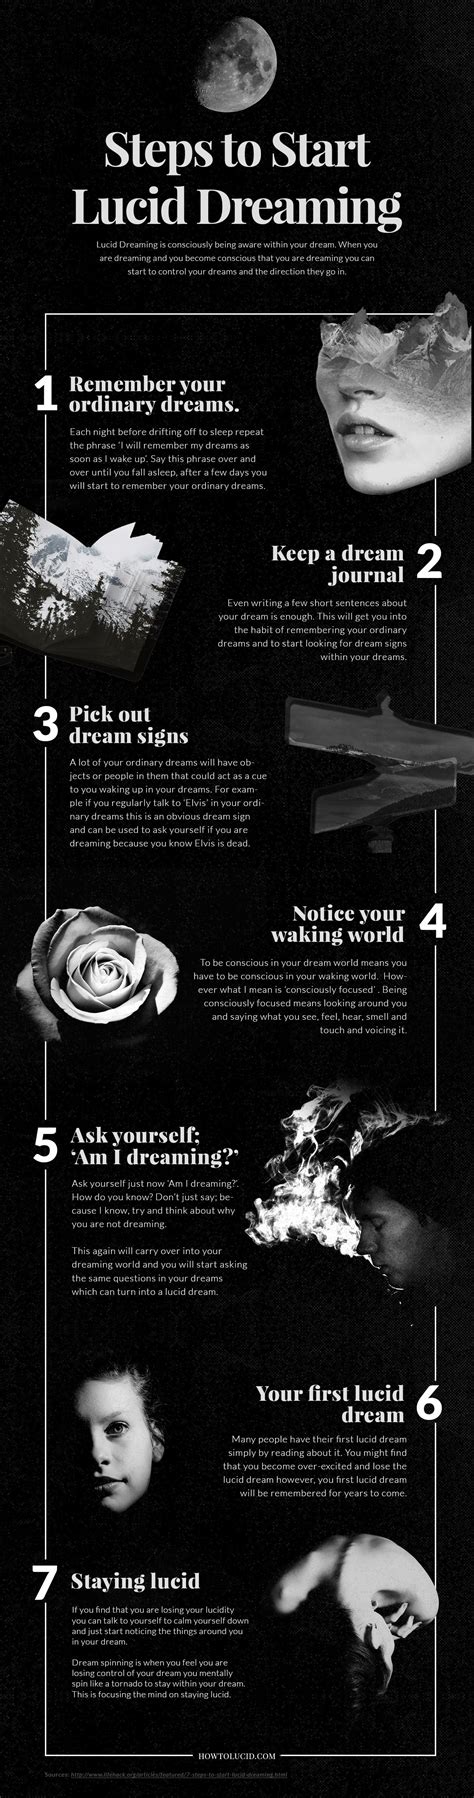 We’ve Created A Visually Beautiful Explanation Of How To Get Started With Lucid Dreaming Or The